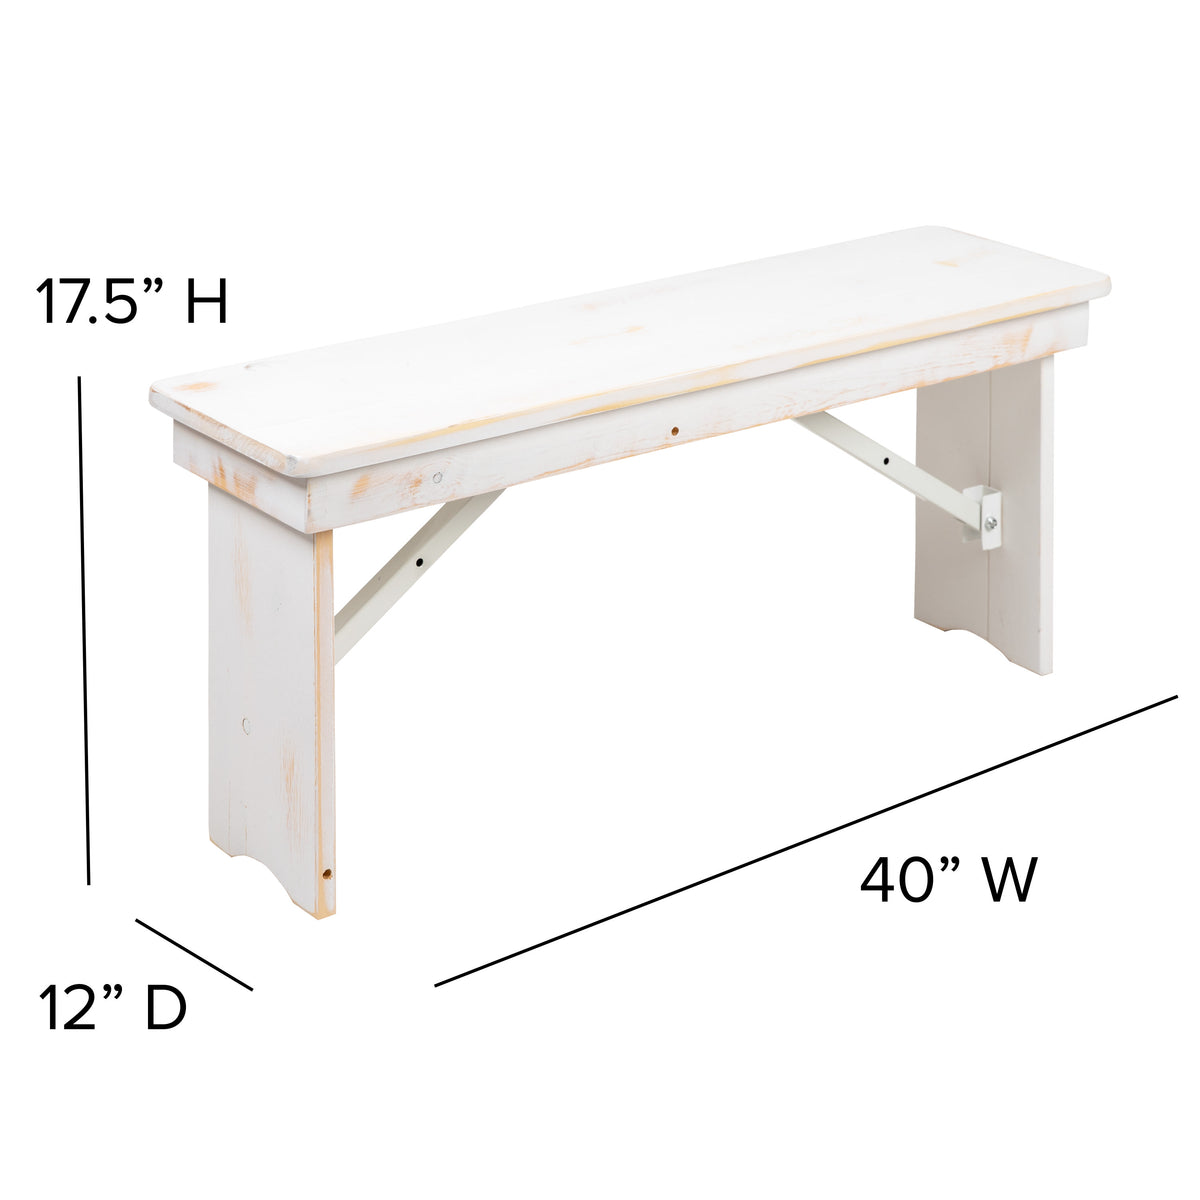 Antique Rustic White |#| 5 Piece Set-7' x 40inch Antique Rustic White Folding Farm Table and Four Bench Set